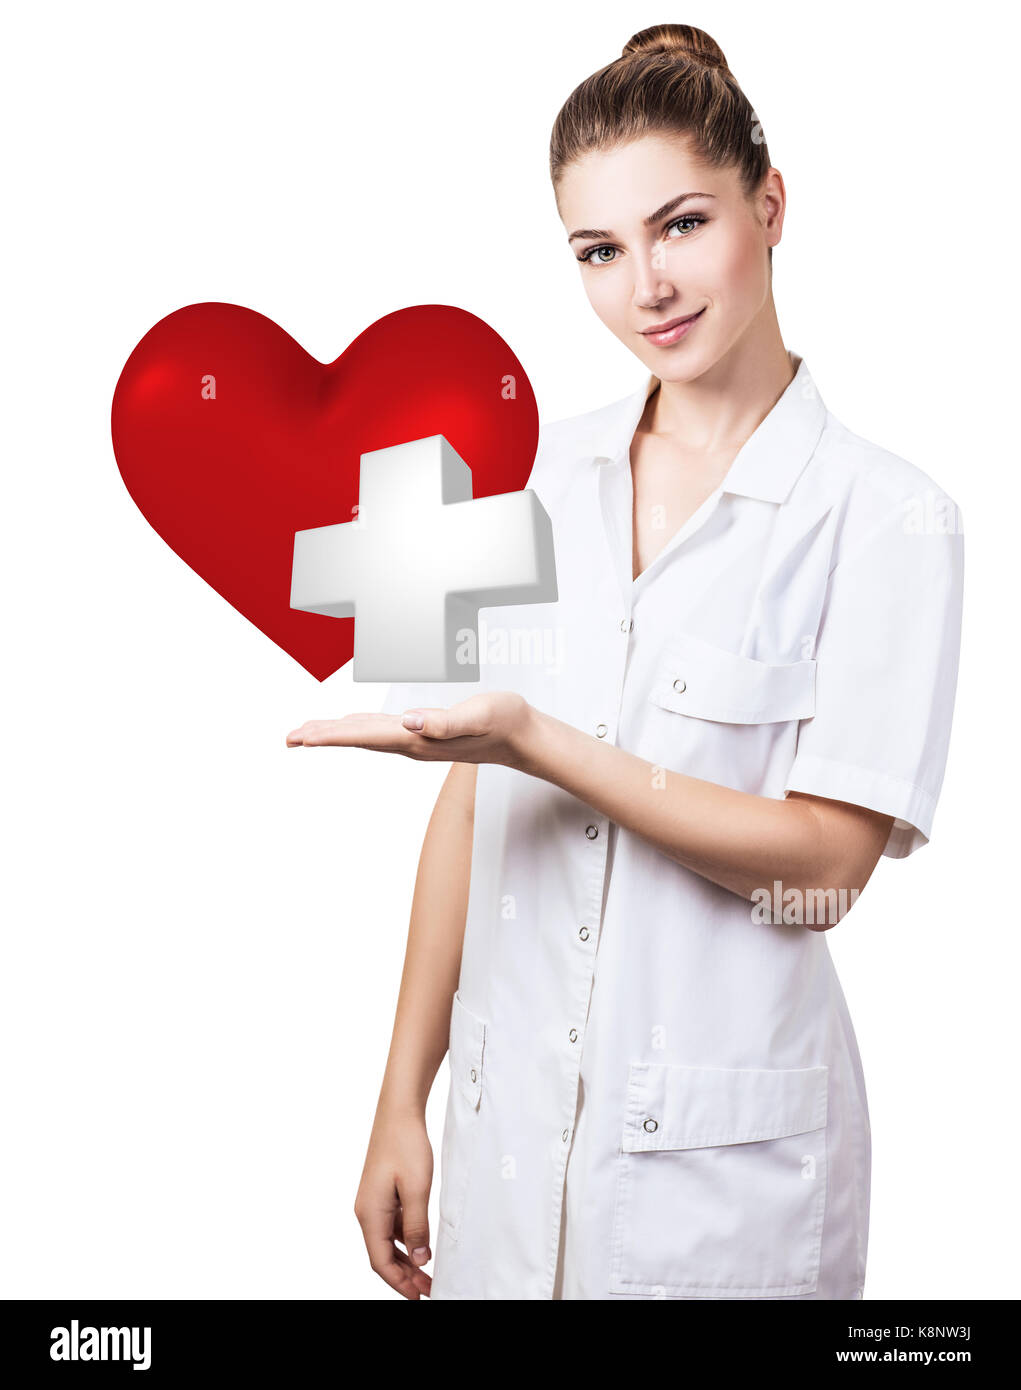 Cardiologist woman doctor holding big red heart. Stock Photo